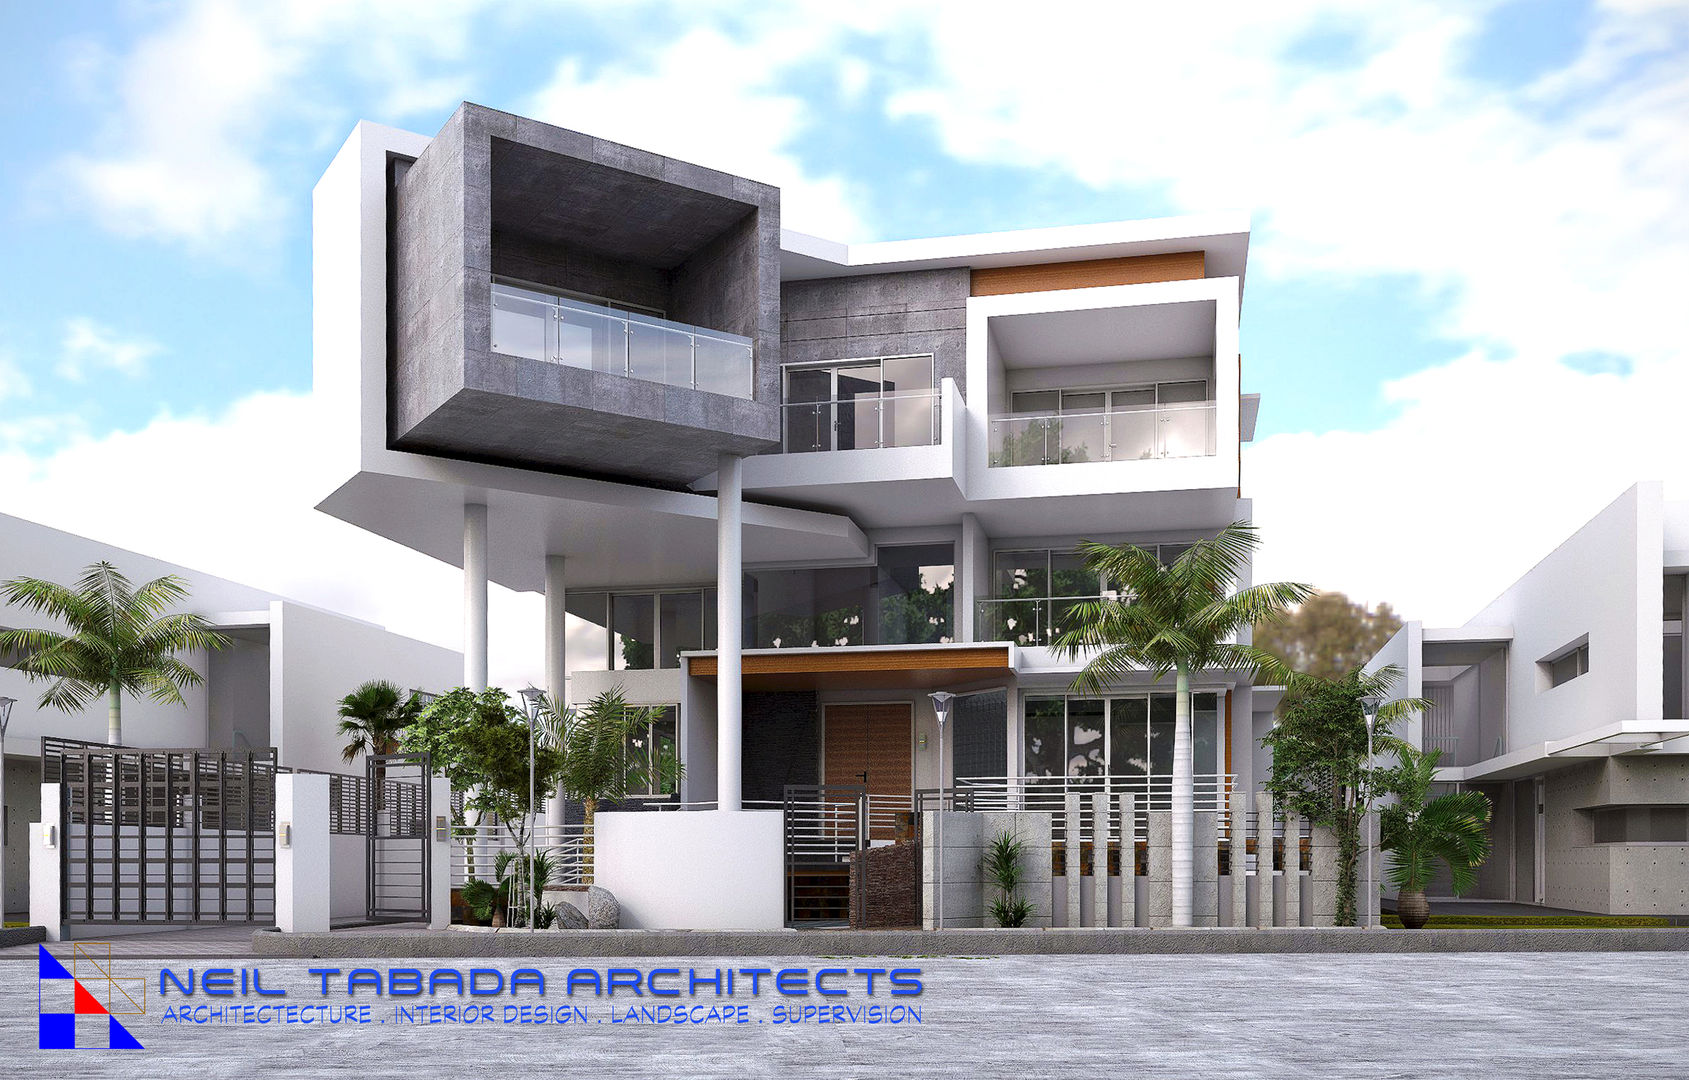 Architectural and Interior Designs, NEIL TABADA ARCHITECTS NEIL TABADA ARCHITECTS Casas modernas